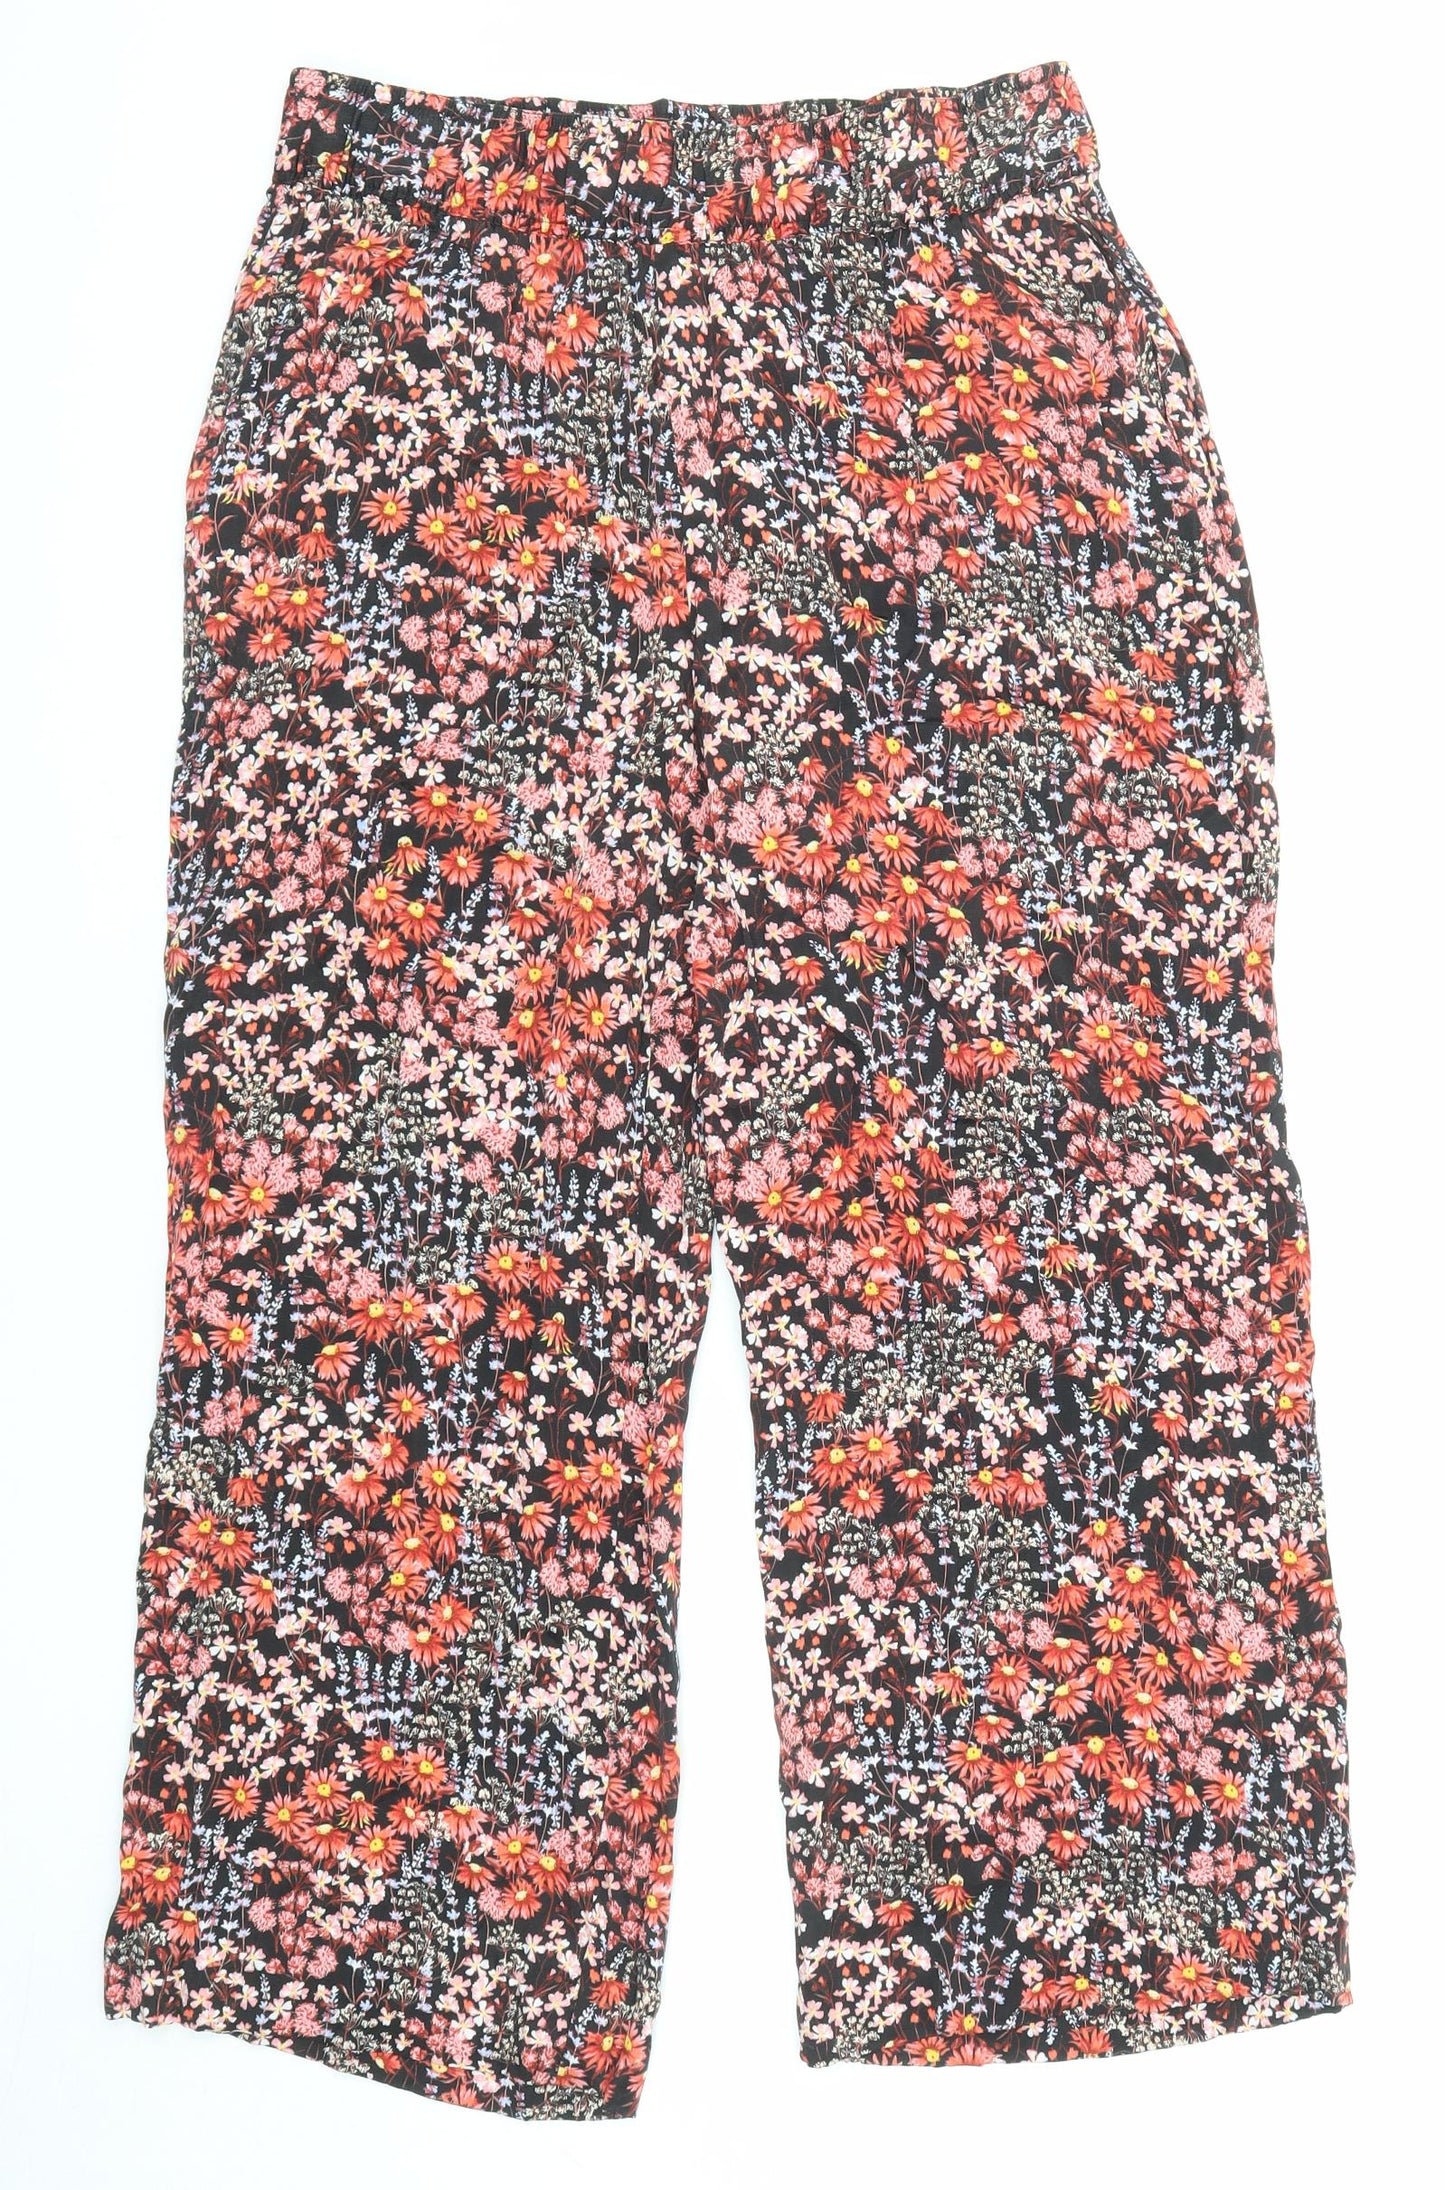 Marks and Spencer Womens Multicoloured Floral Viscose Trousers Size M L26 in Regular